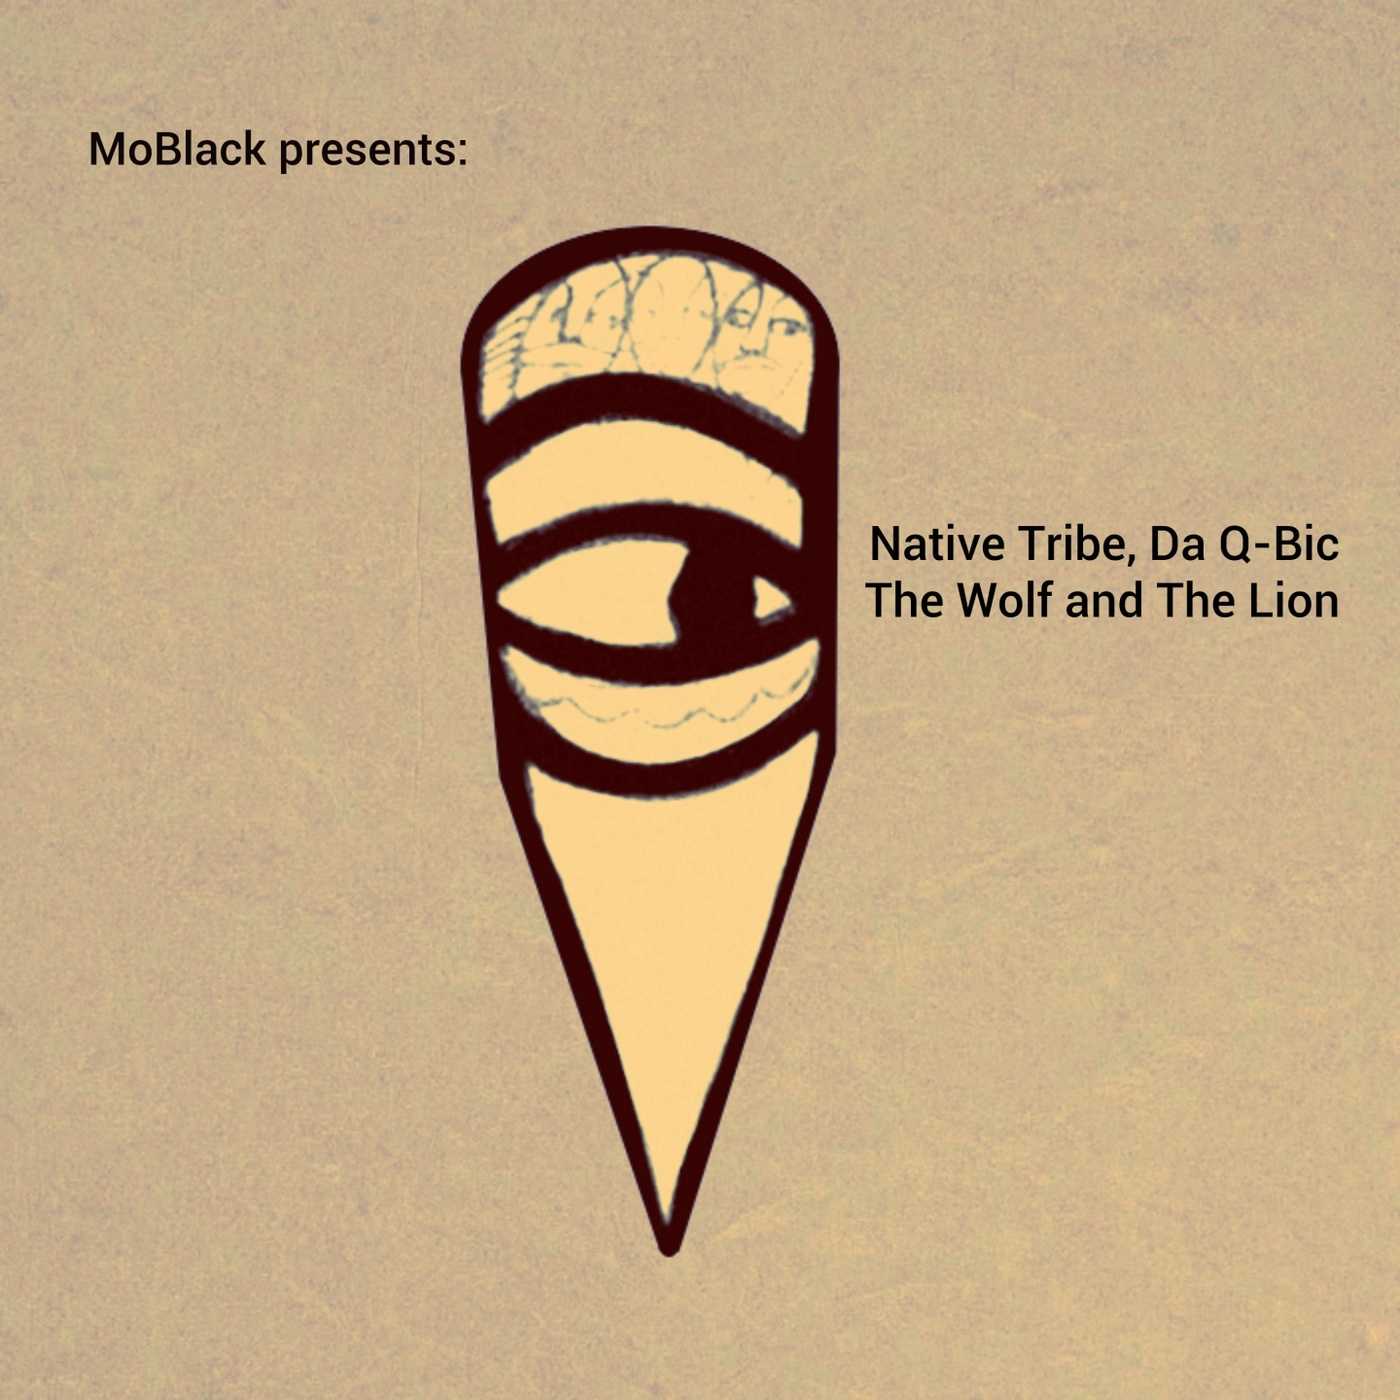 Native Tribe, Da Q-Bic - The Wolf and the Lion / Mo Black